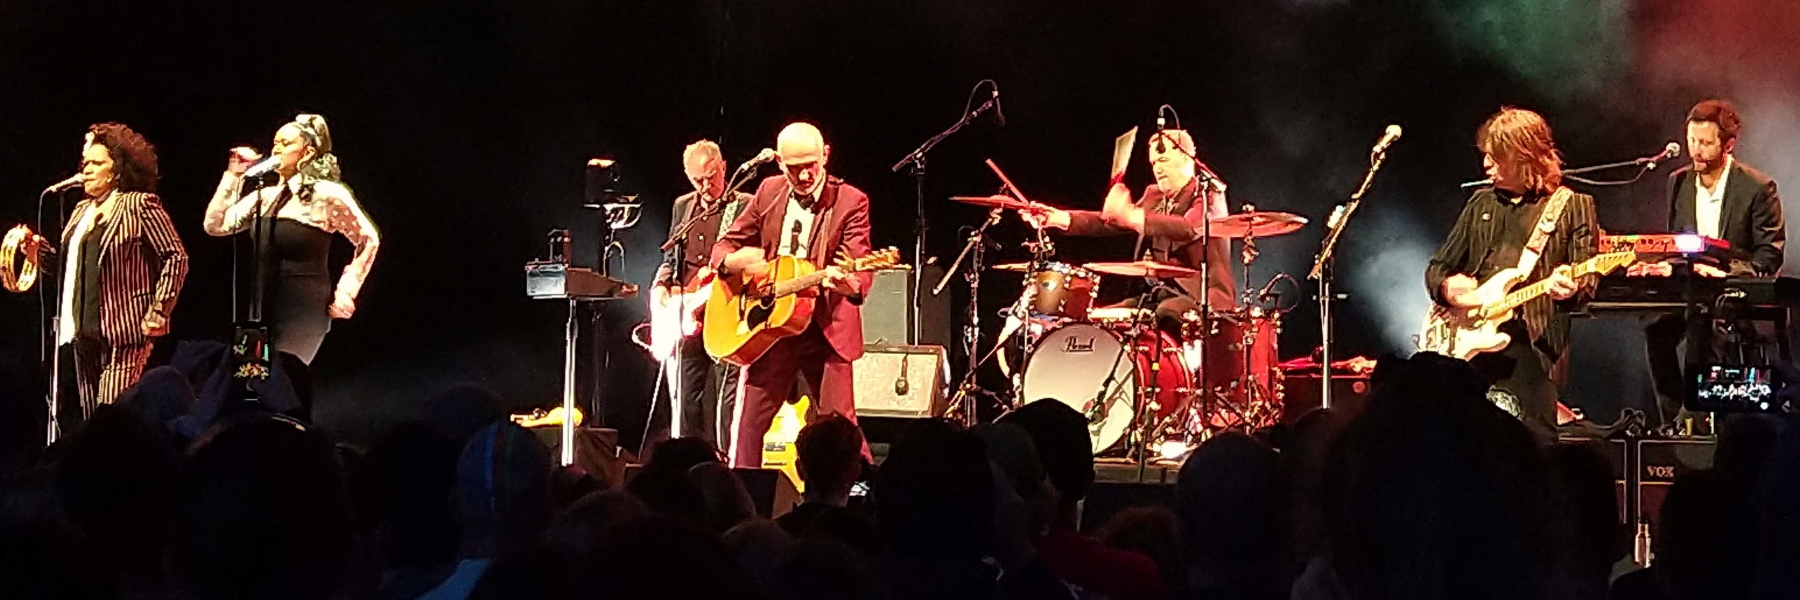 Paul Kelly and band 12/12/2019